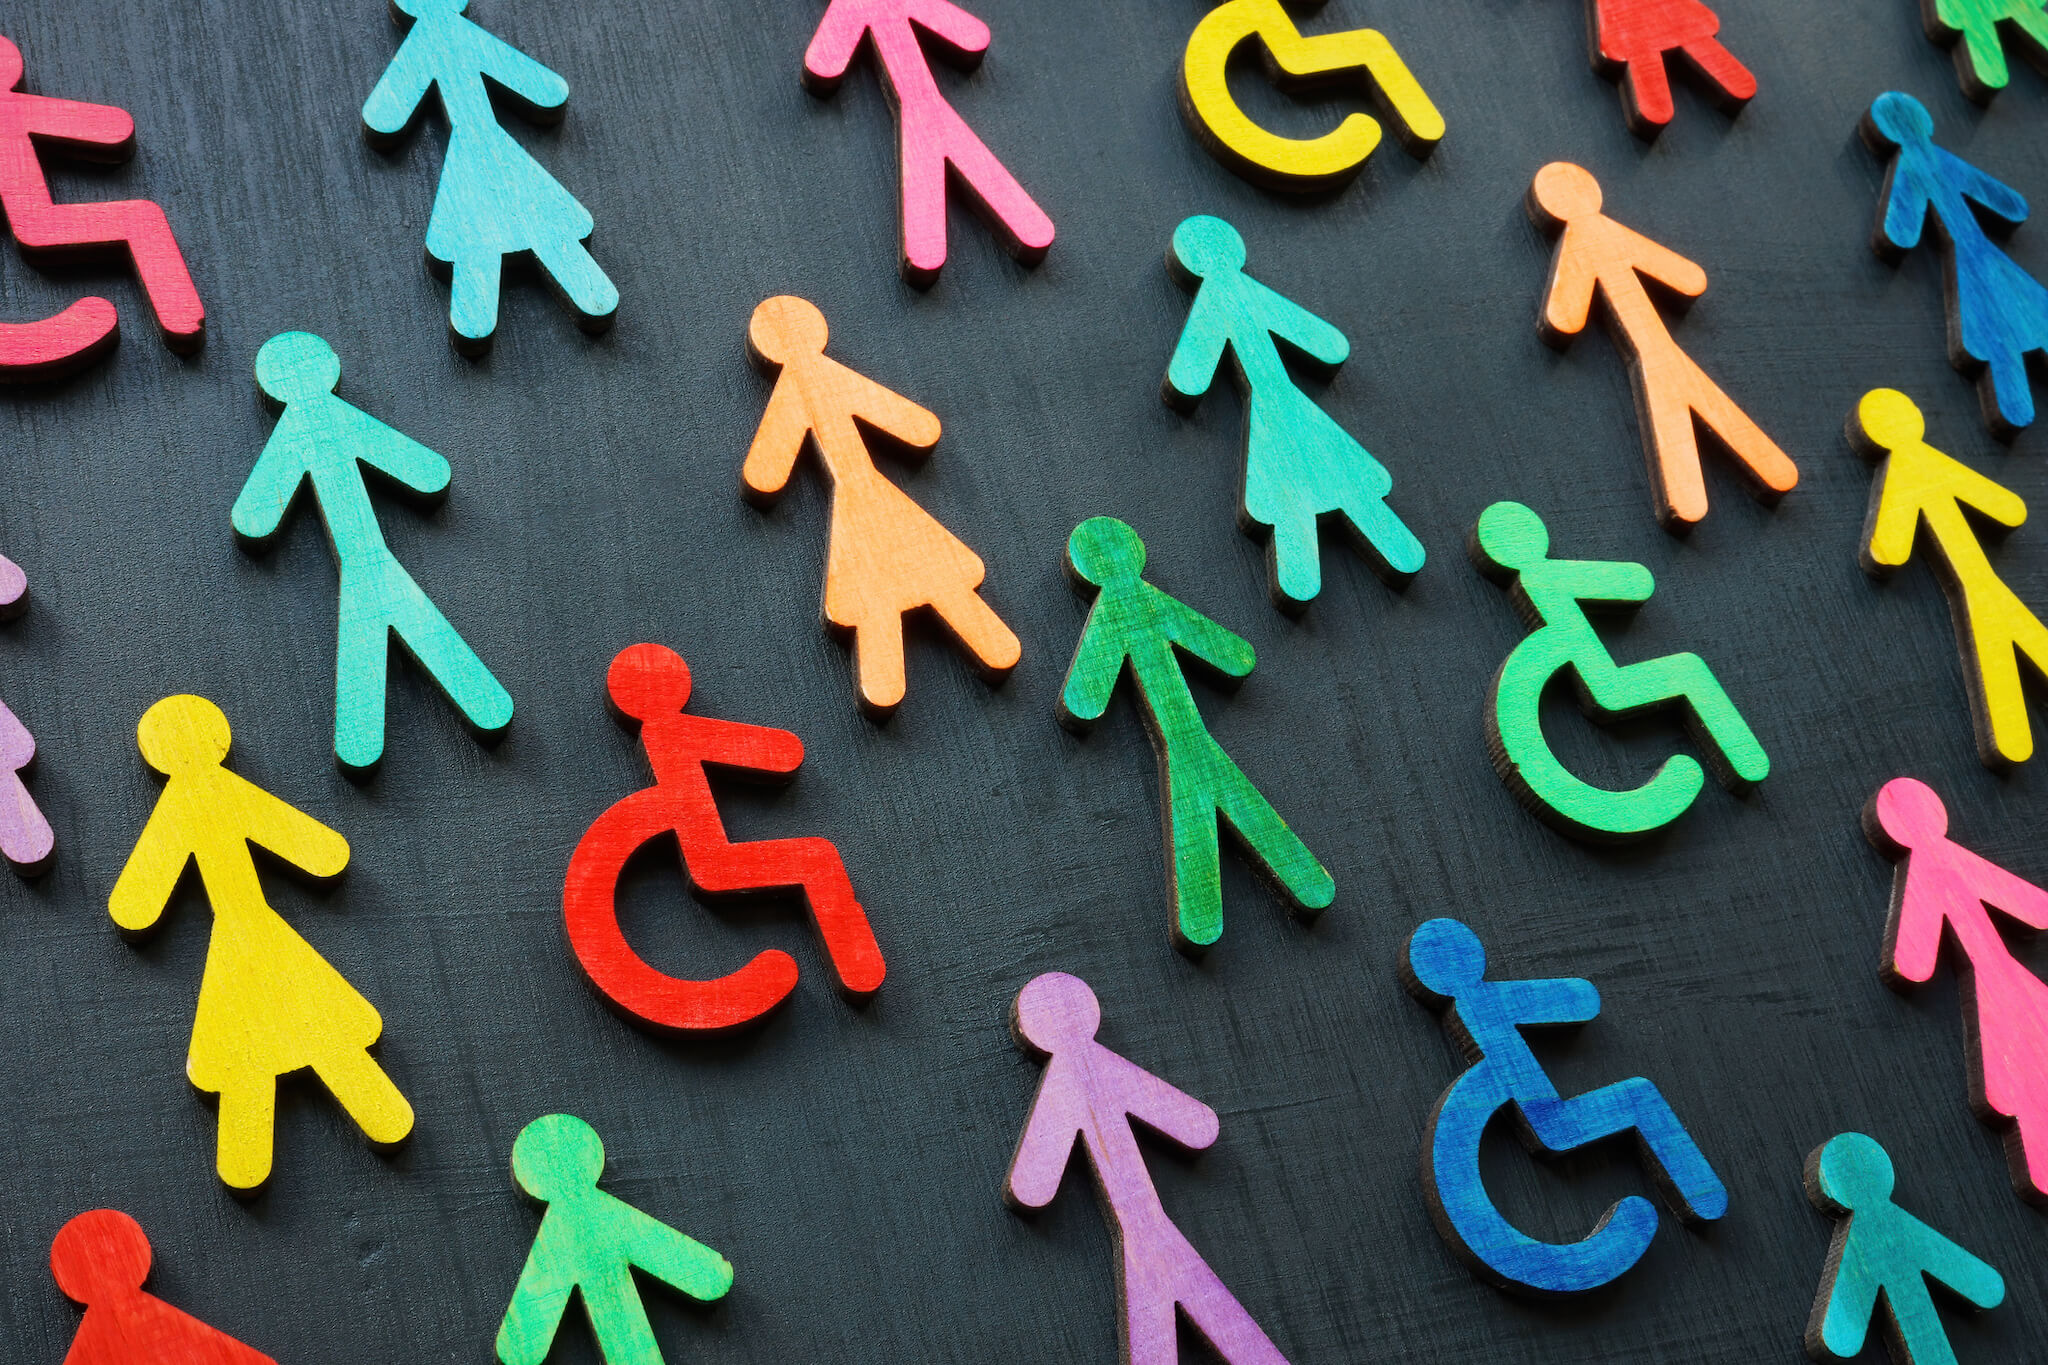 Colorful figurines of people on a dark background. Some of the figures are a person with a wheelchair.